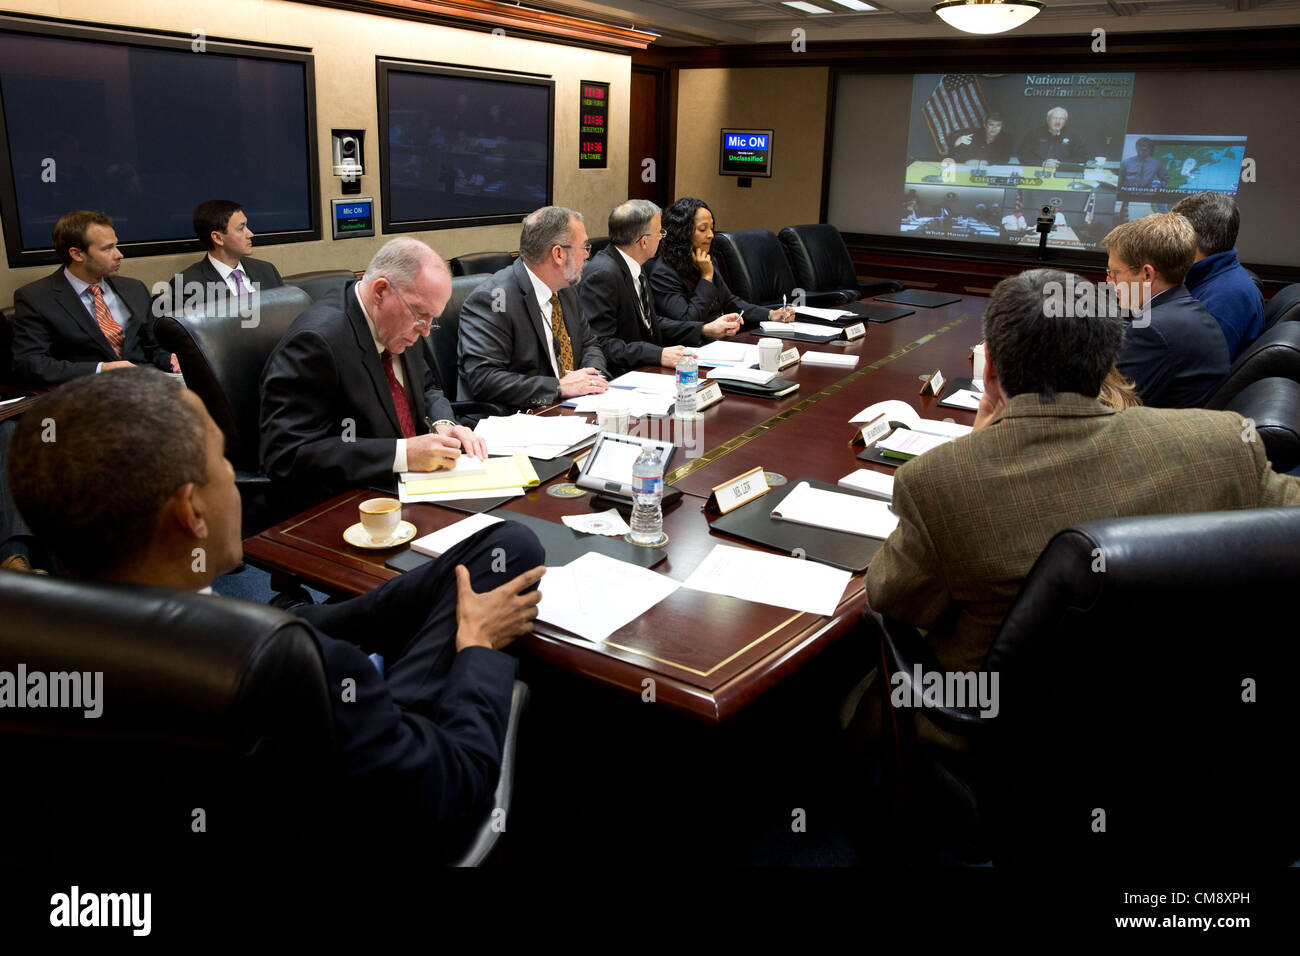 President Barack Obama receives an update on the ongoing response to Hurricane Sandy, in the Situation Room of the White House, Oct. 29 2012. Participating via teleconference, clockwise from top left, are:  Secretary of Homeland Security Janet Napolitano; FEMA Administrator Craig Fugate; Rick Knabb, Director of the National Hurricane Center; Secretary of Transportation Ray LaHood; and Secretary of Energy Steven Chu. Pictured, from left, are: Clark Stevens, Assistant Press Secretary; Emmett Beliveau, Credit: Archive Image/White House Stock Photo